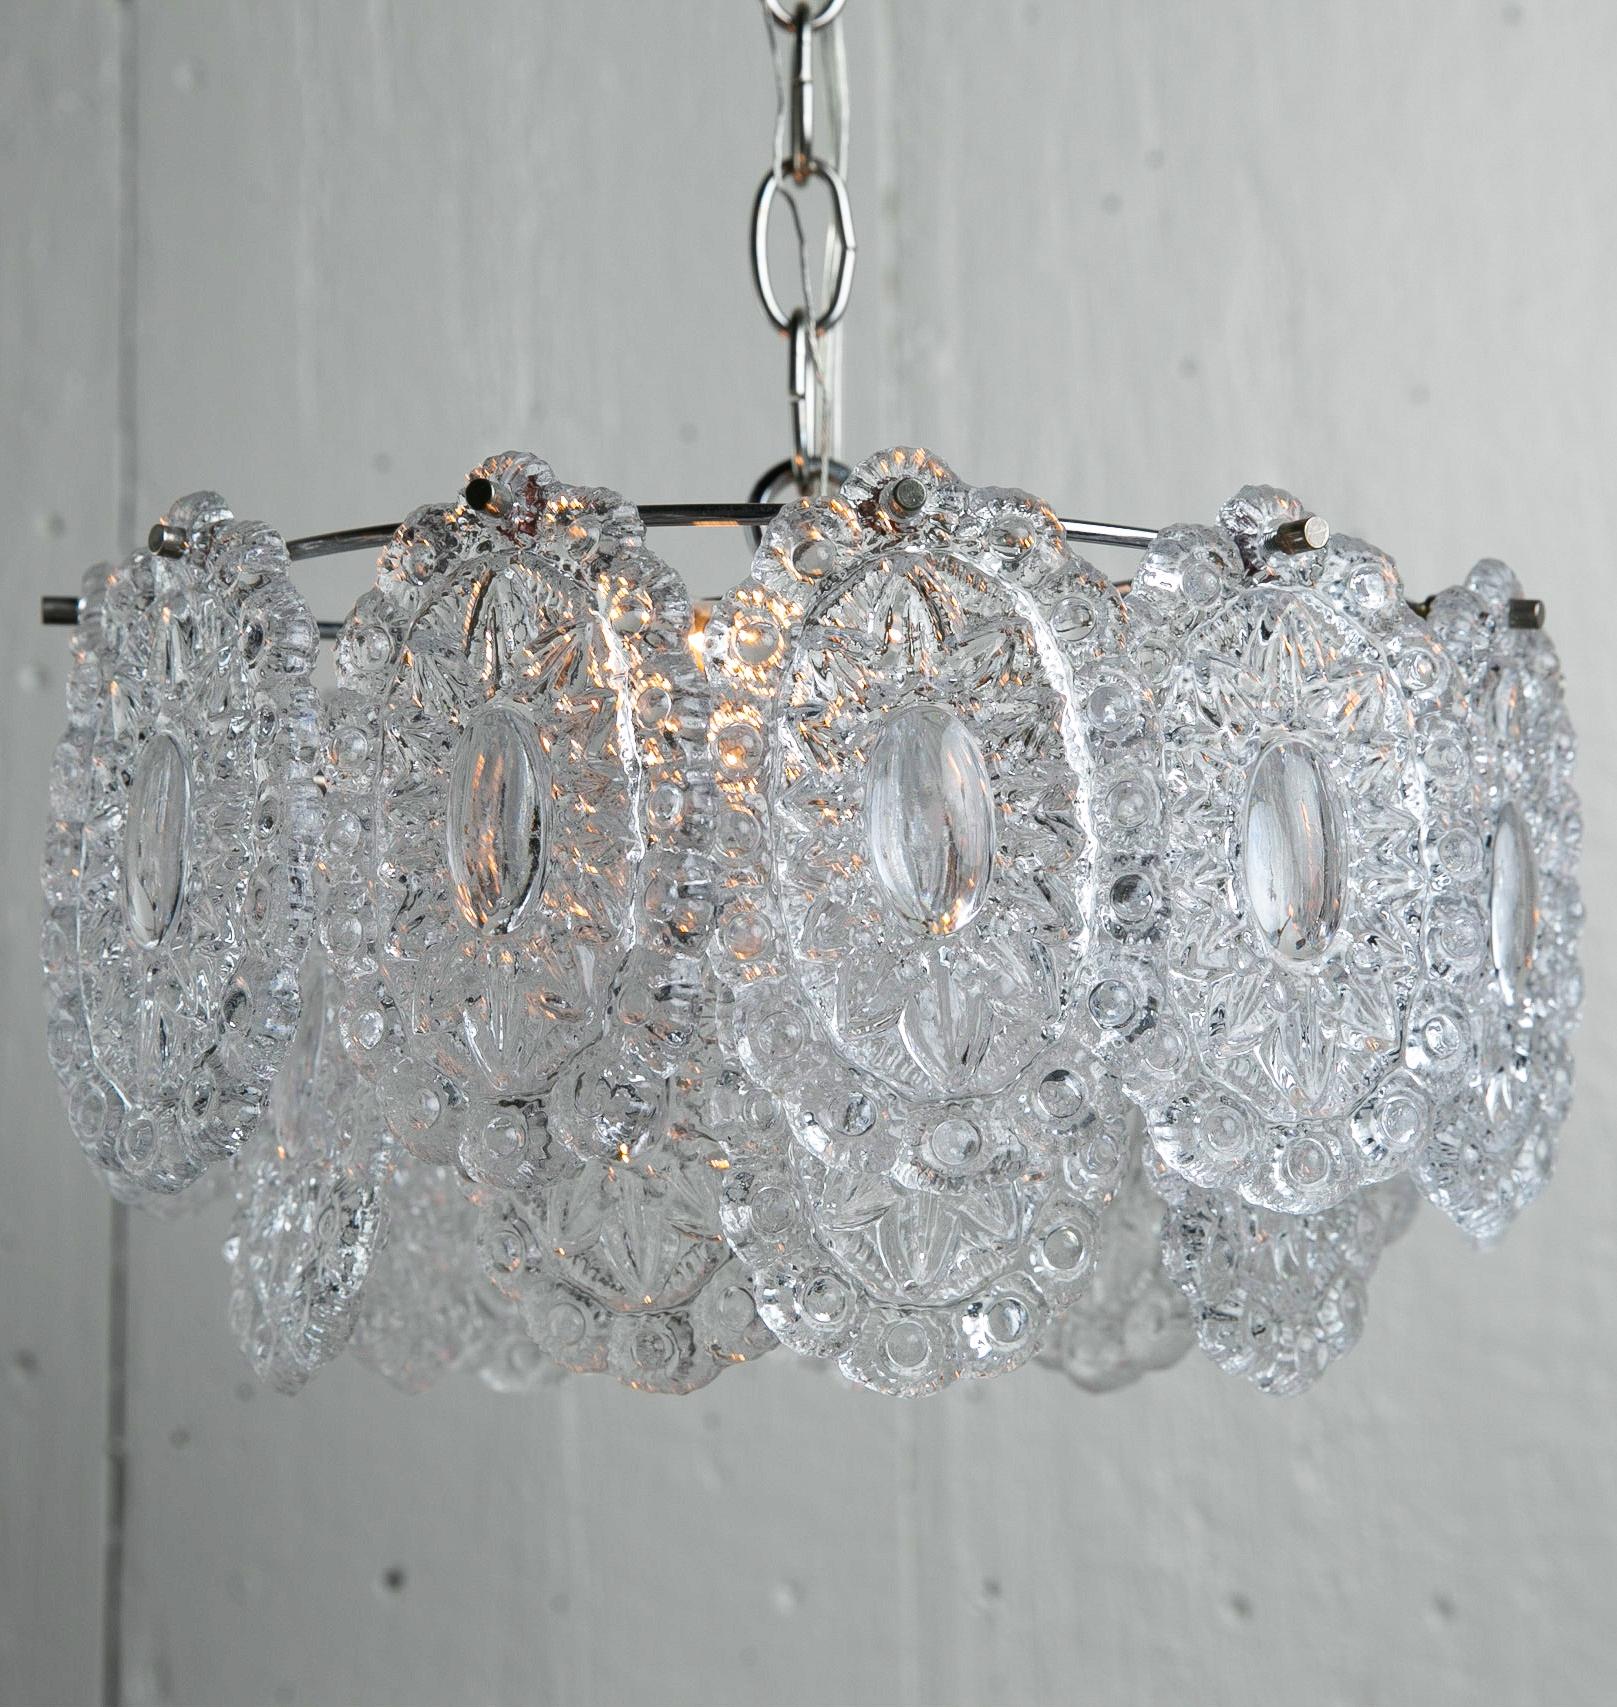 Hand-Crafted Midcentury Italian Glass Circular Chandelier or Pendant with Heavy Glass Discs